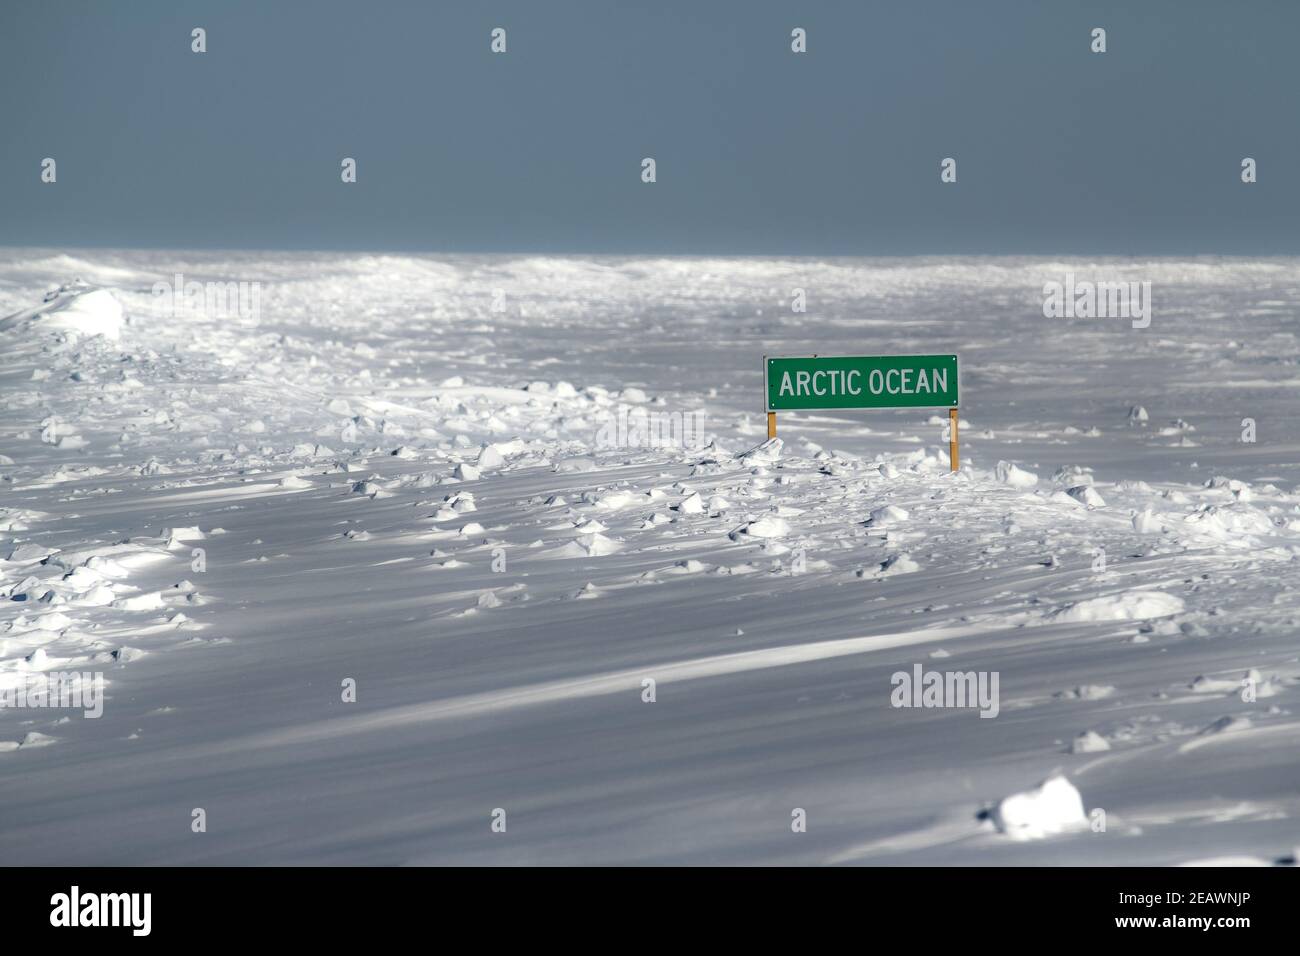 Arctic Ocean road sign sticking out of the snow along the old Inuvik-Tuktoyaktuk-Aklavik ice road in winter, Northwest Territories, Canada. Stock Photo